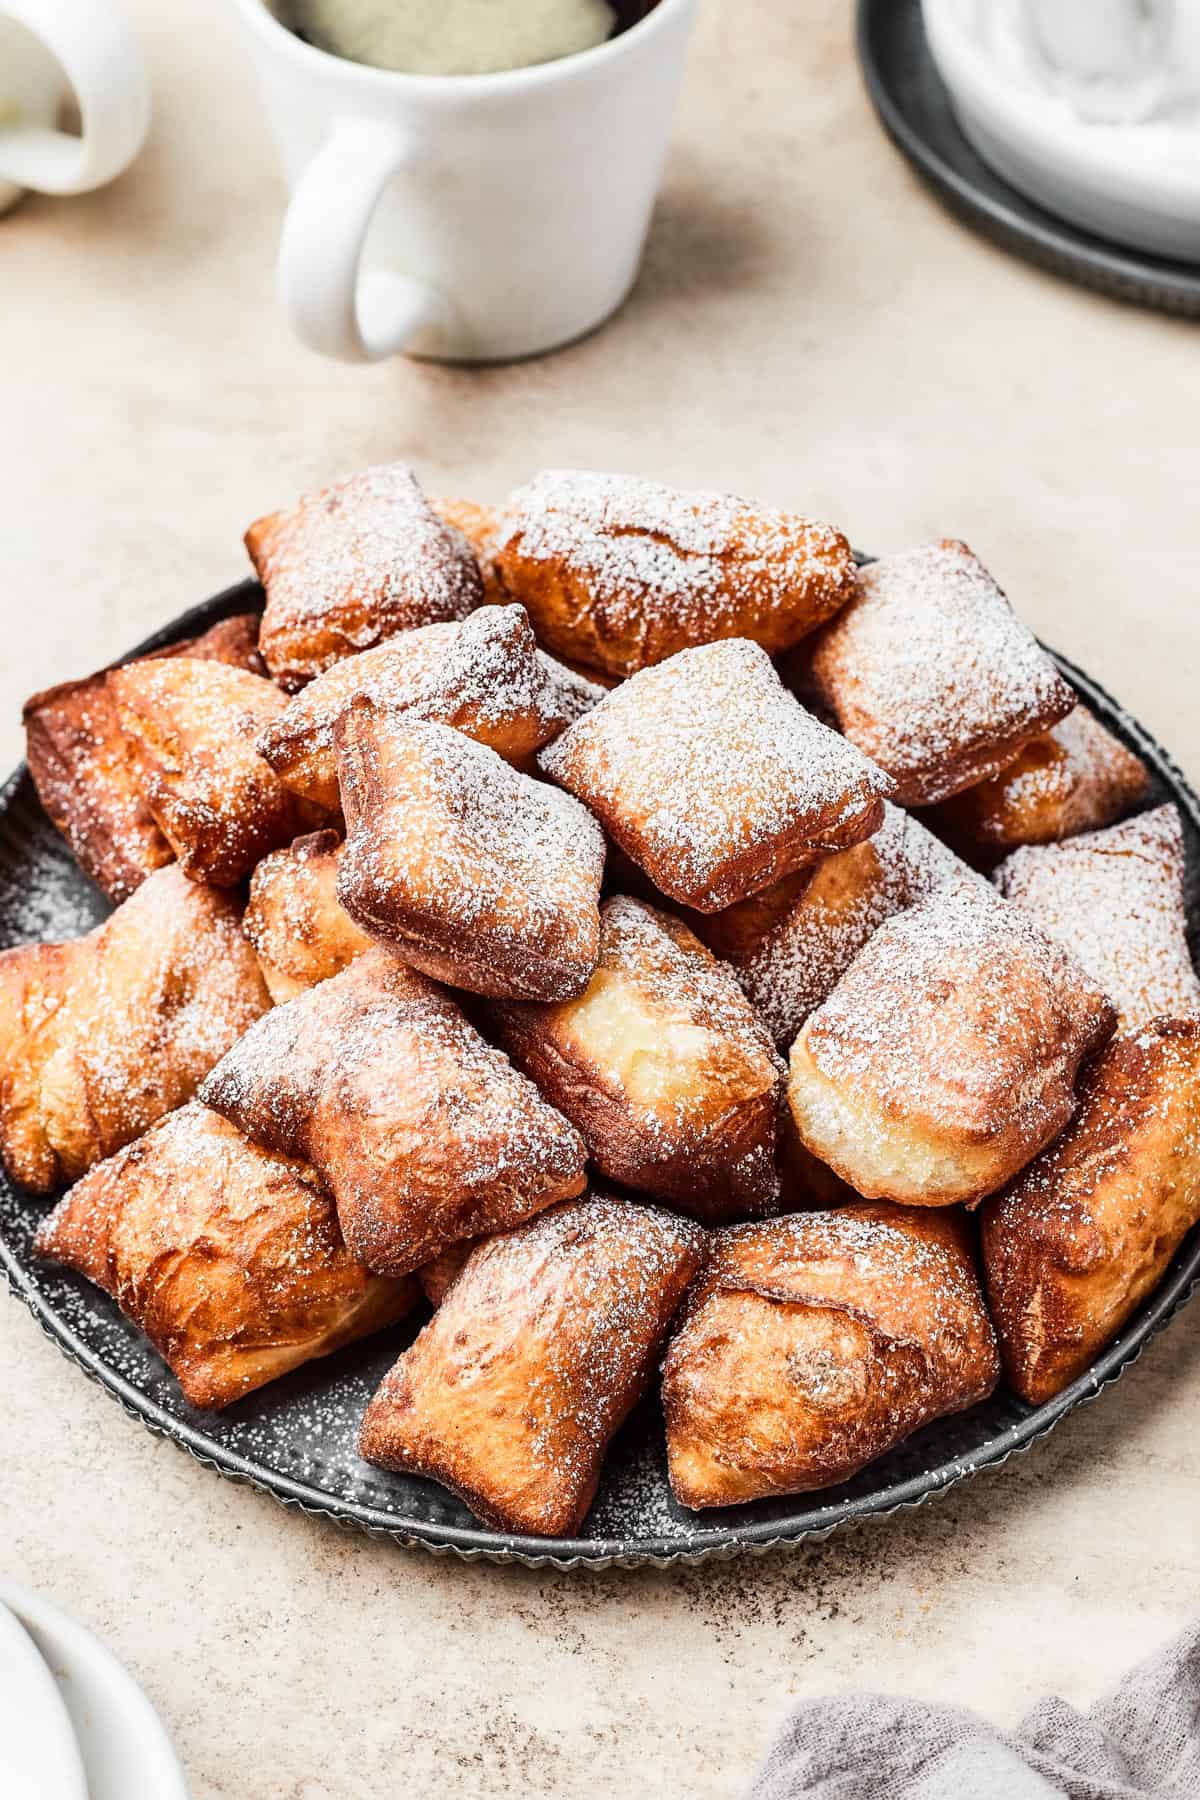 A plate of fried beignets, dusted with powdered sugar.